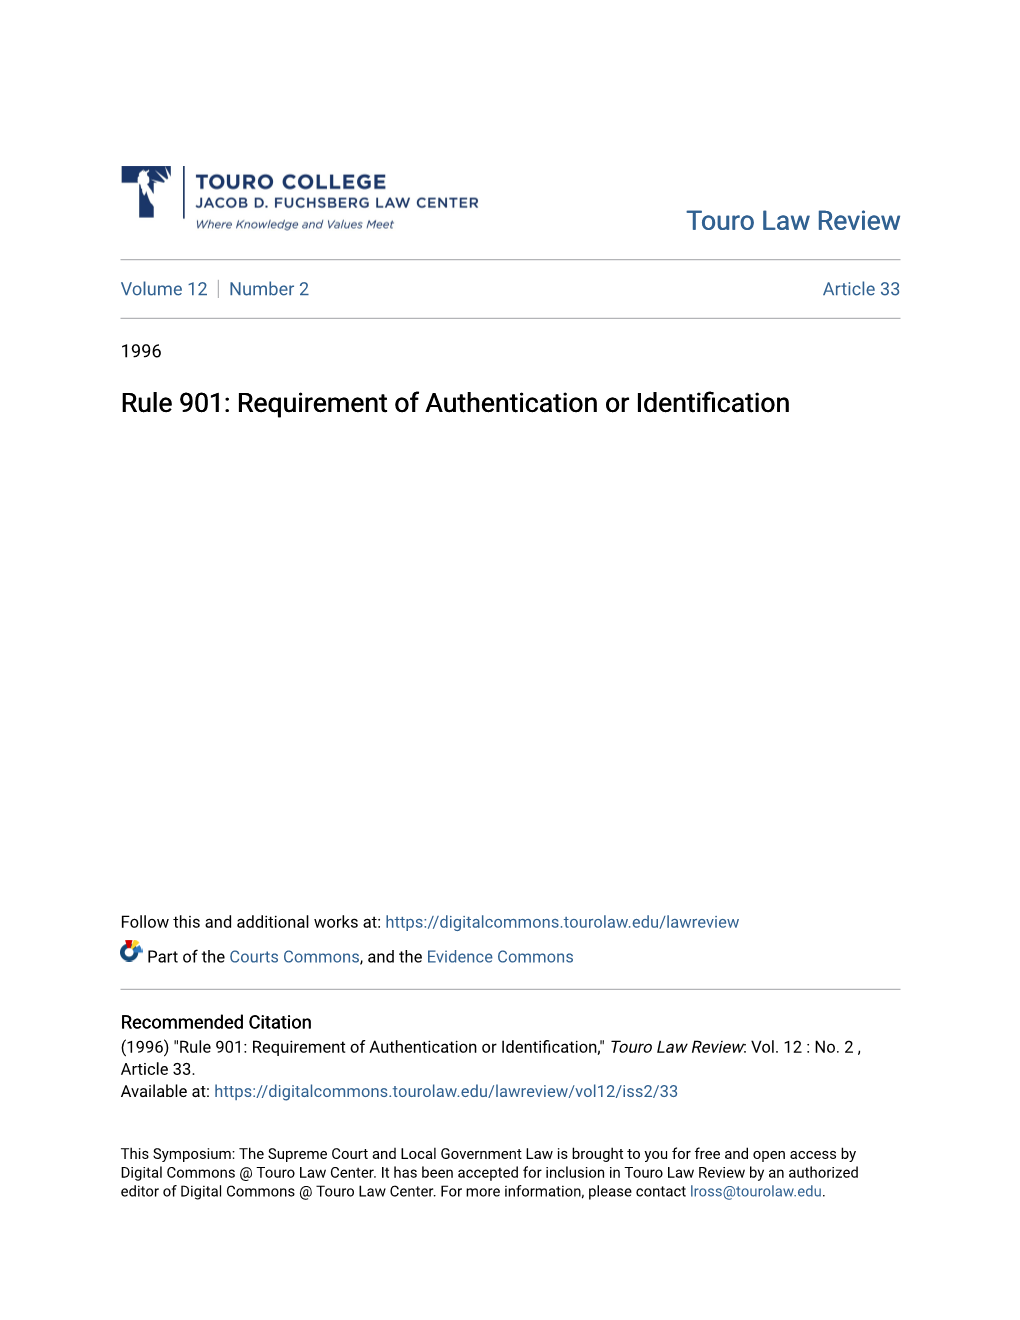 Rule 901: Requirement of Authentication Or Identification